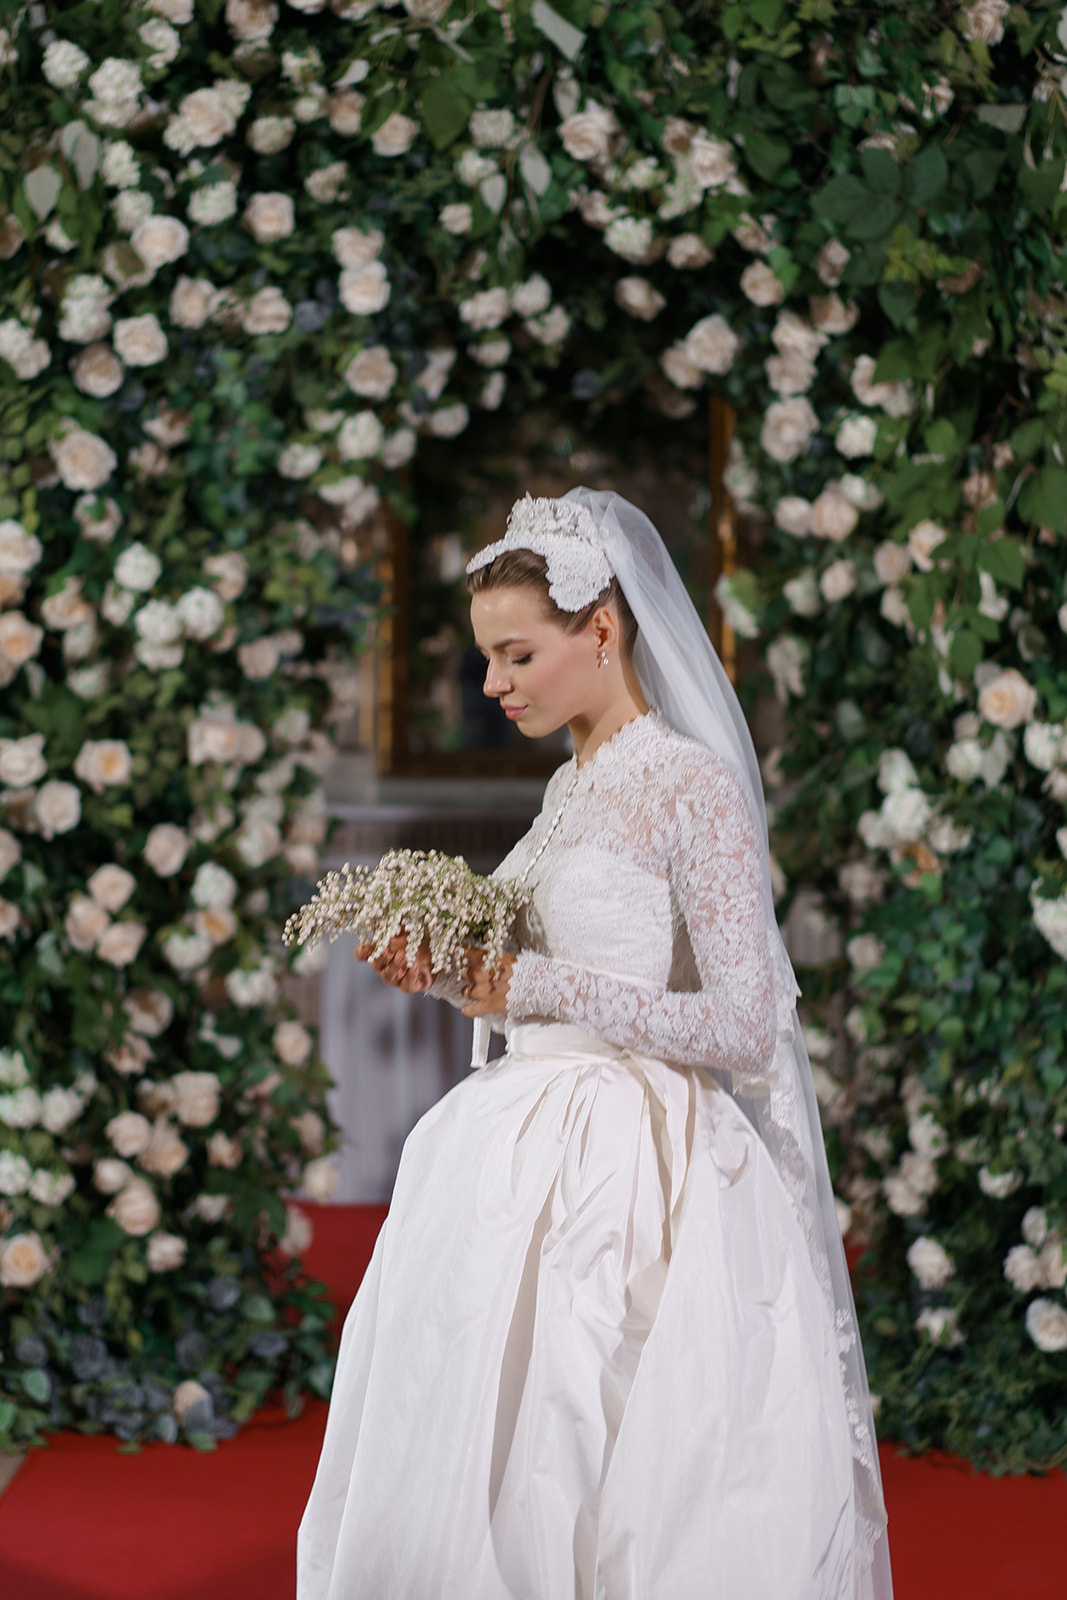 Grace Kelly inspired bride poses with veil in front of white rose arch